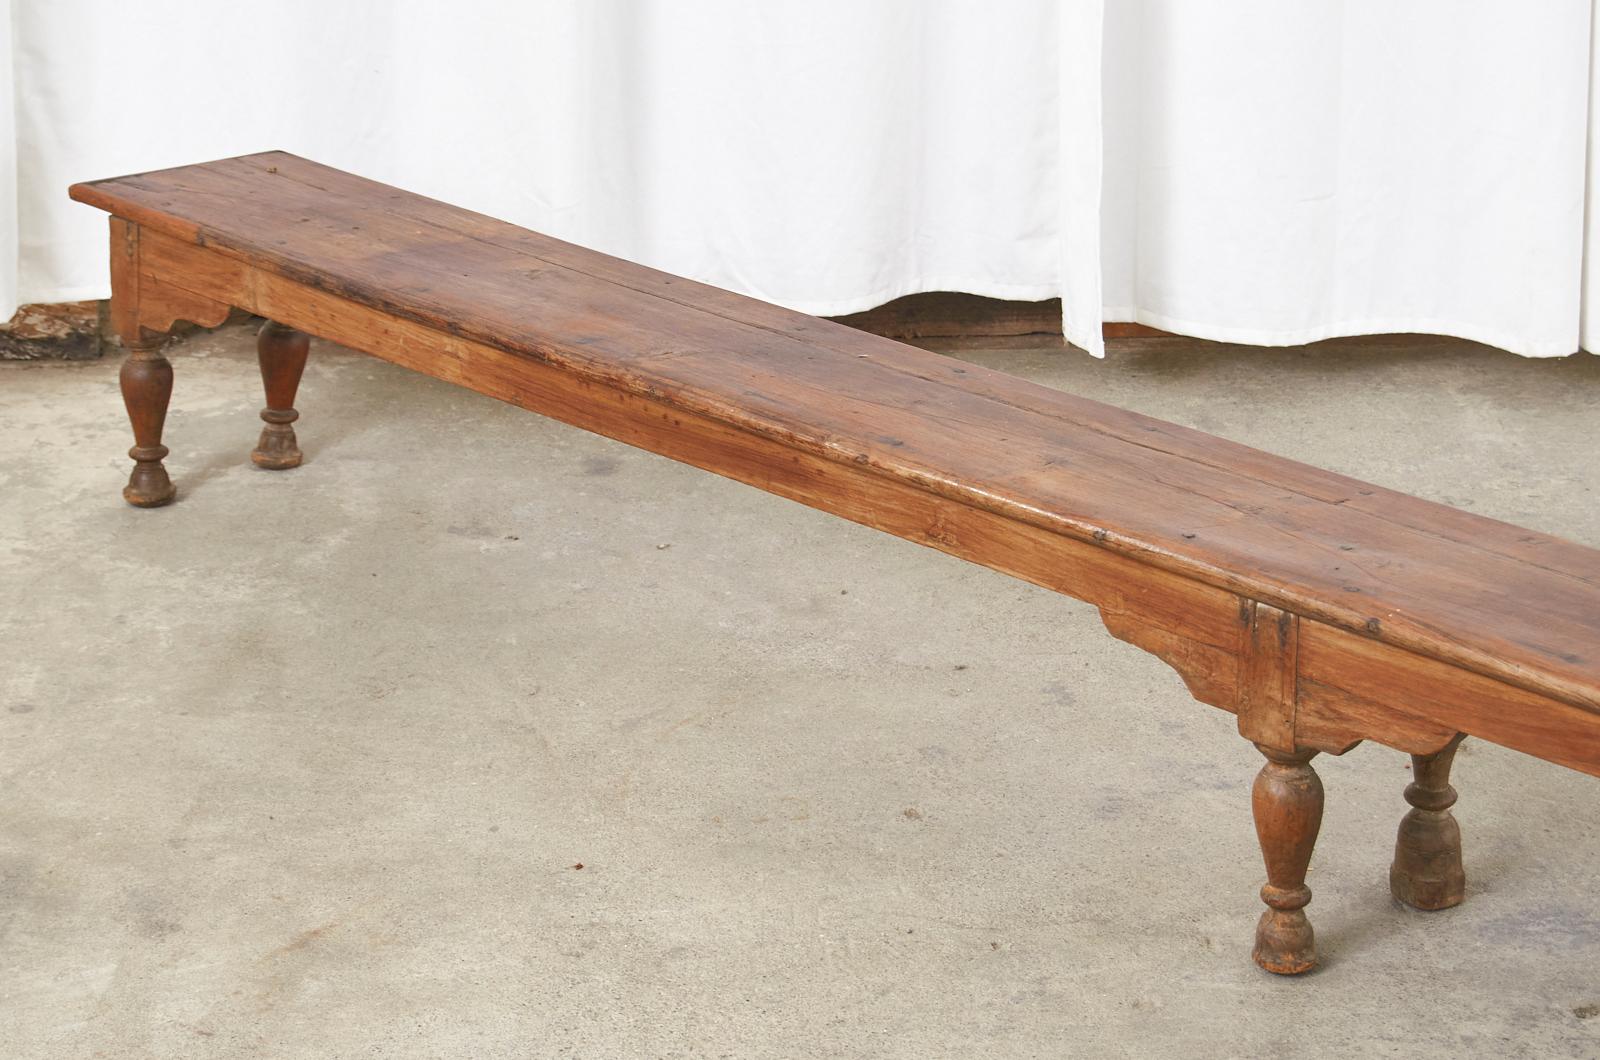 19th Century British Colonial Hardwood Low Table or Bench 1